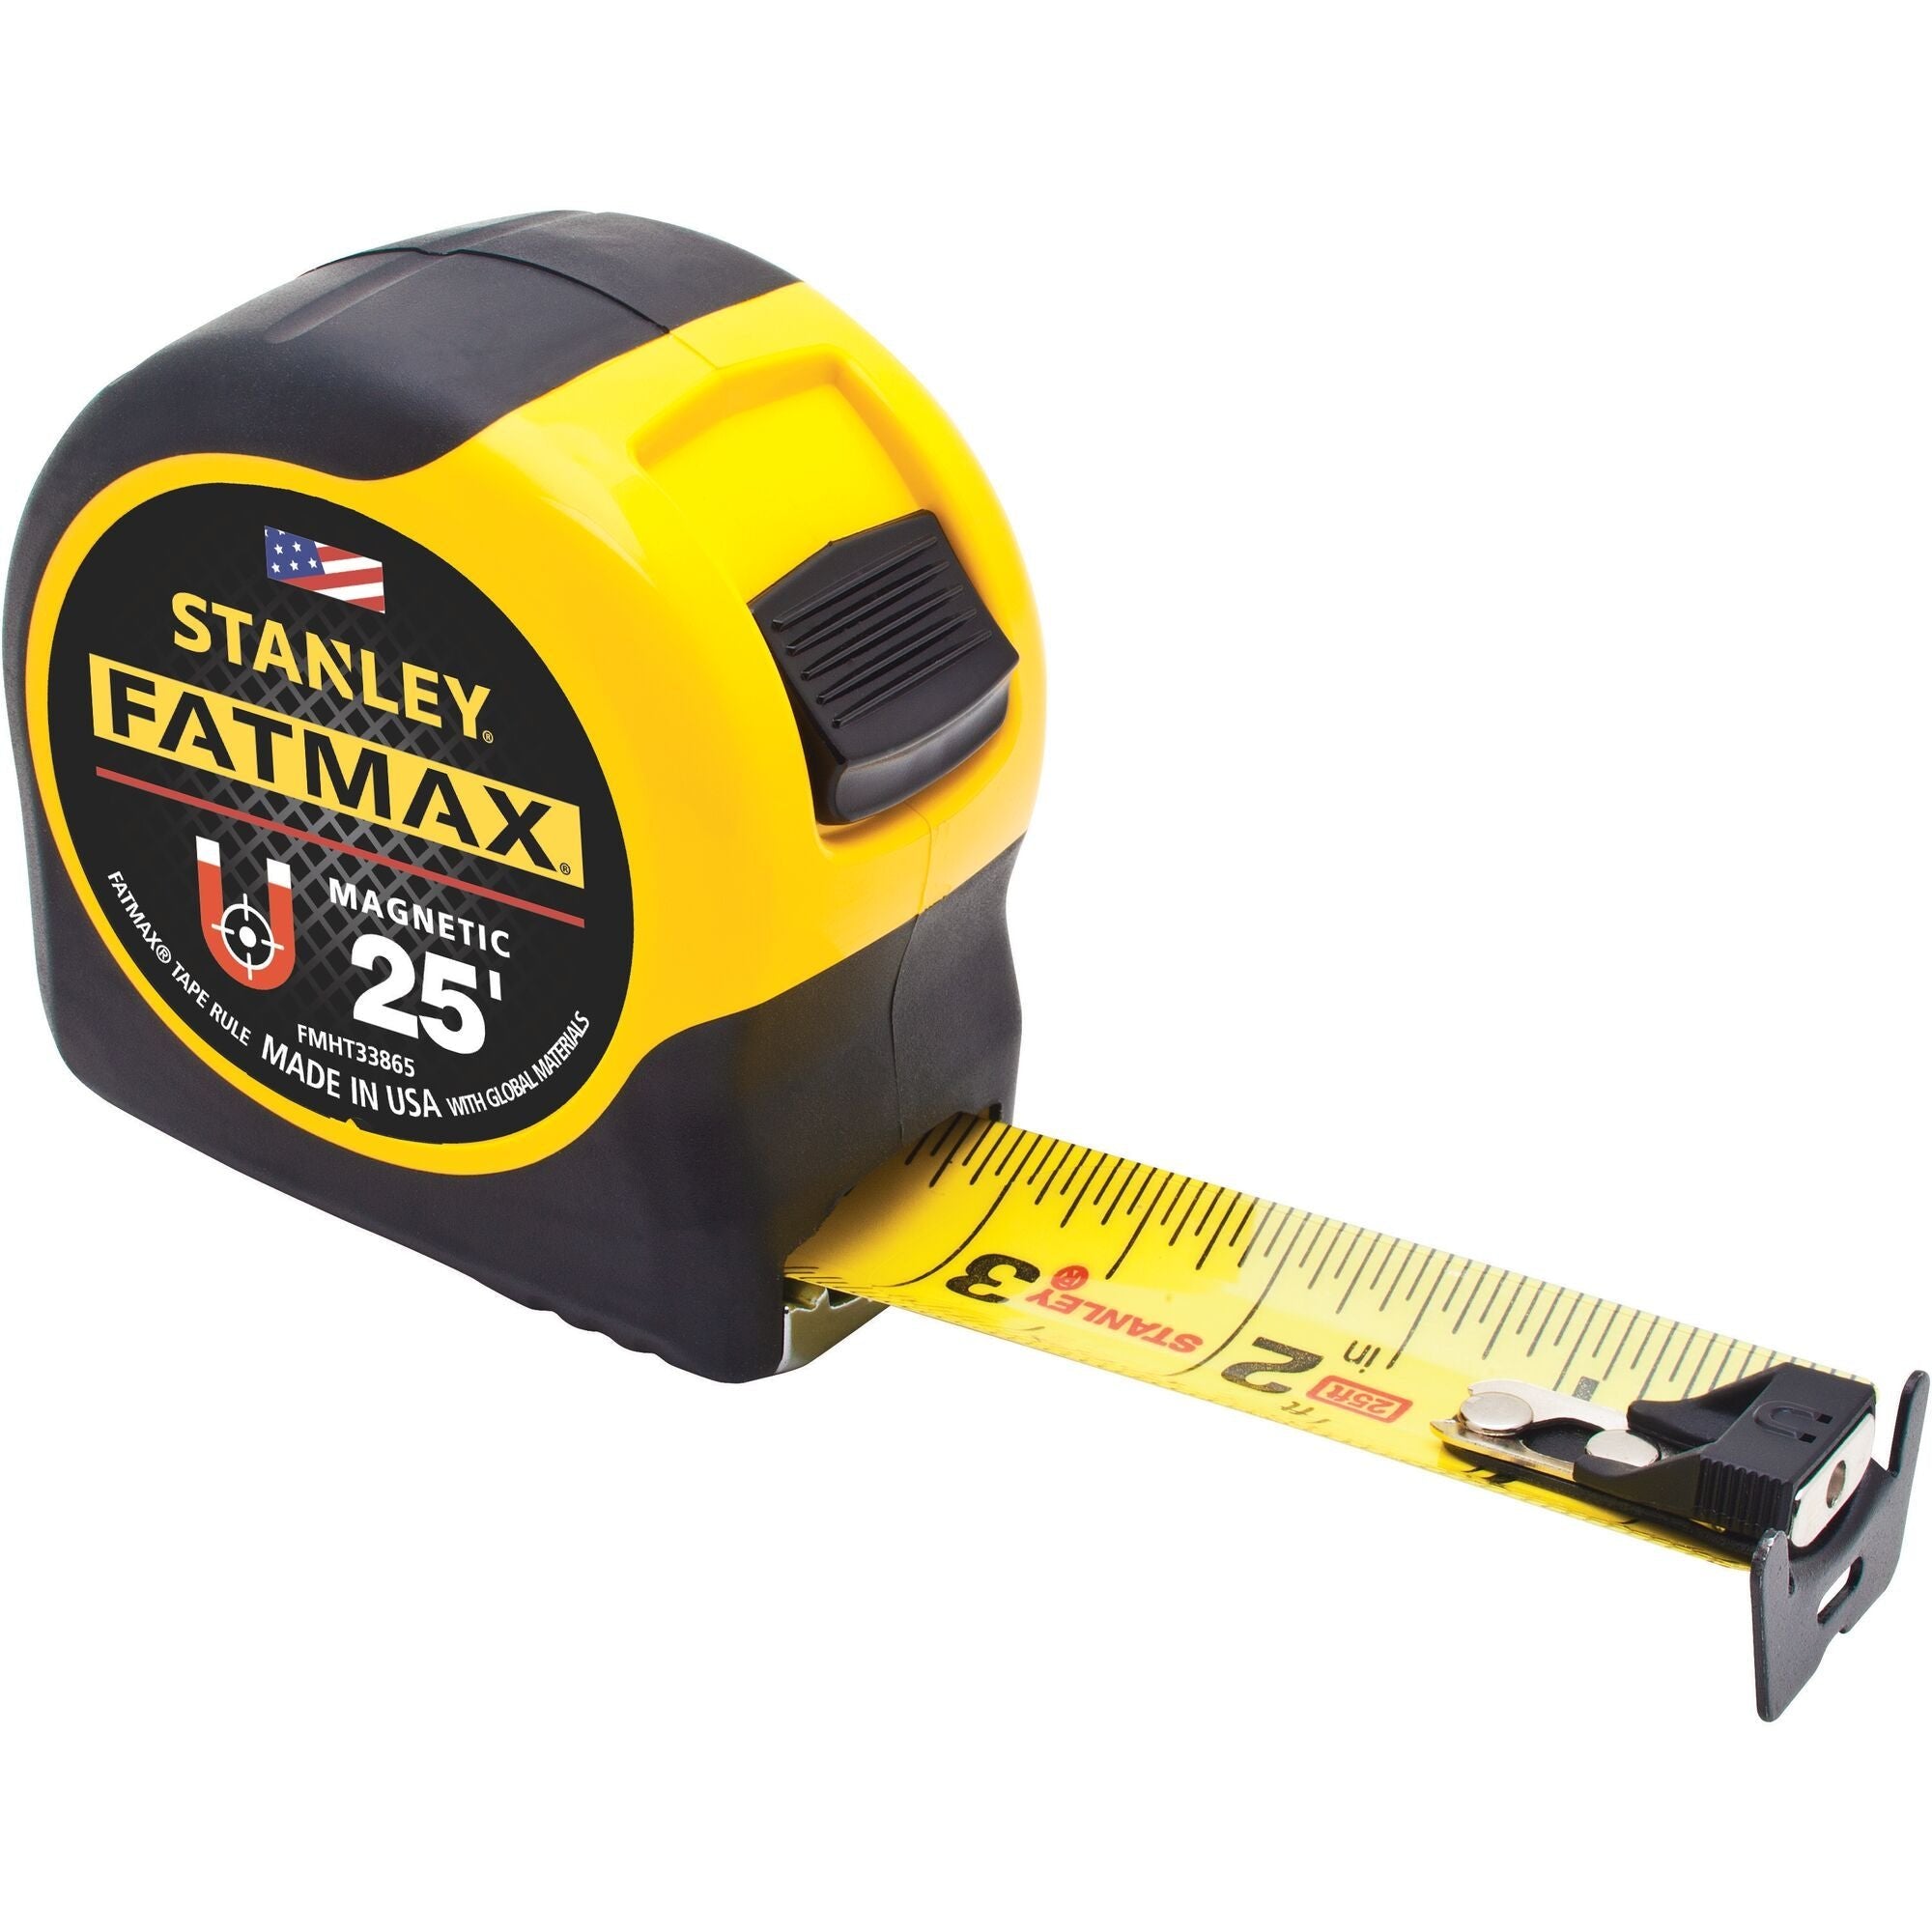 STANLEY FMHT33865 25 ft STANLEY® FATMAX® Magnetic Tape